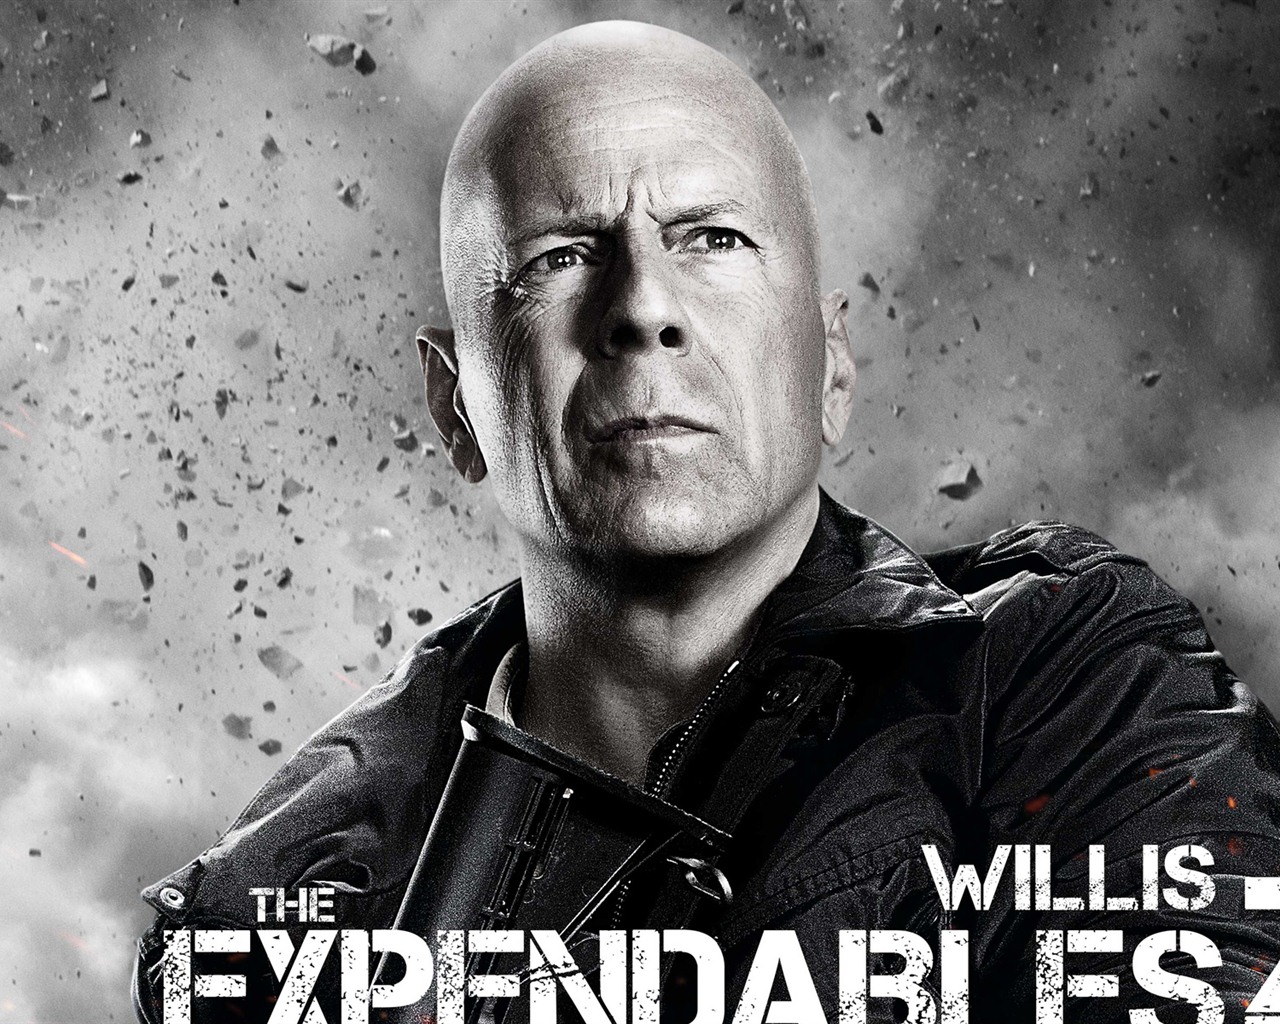 2012 The Expendables 2 敢死队2 高清壁纸12 - 1280x1024